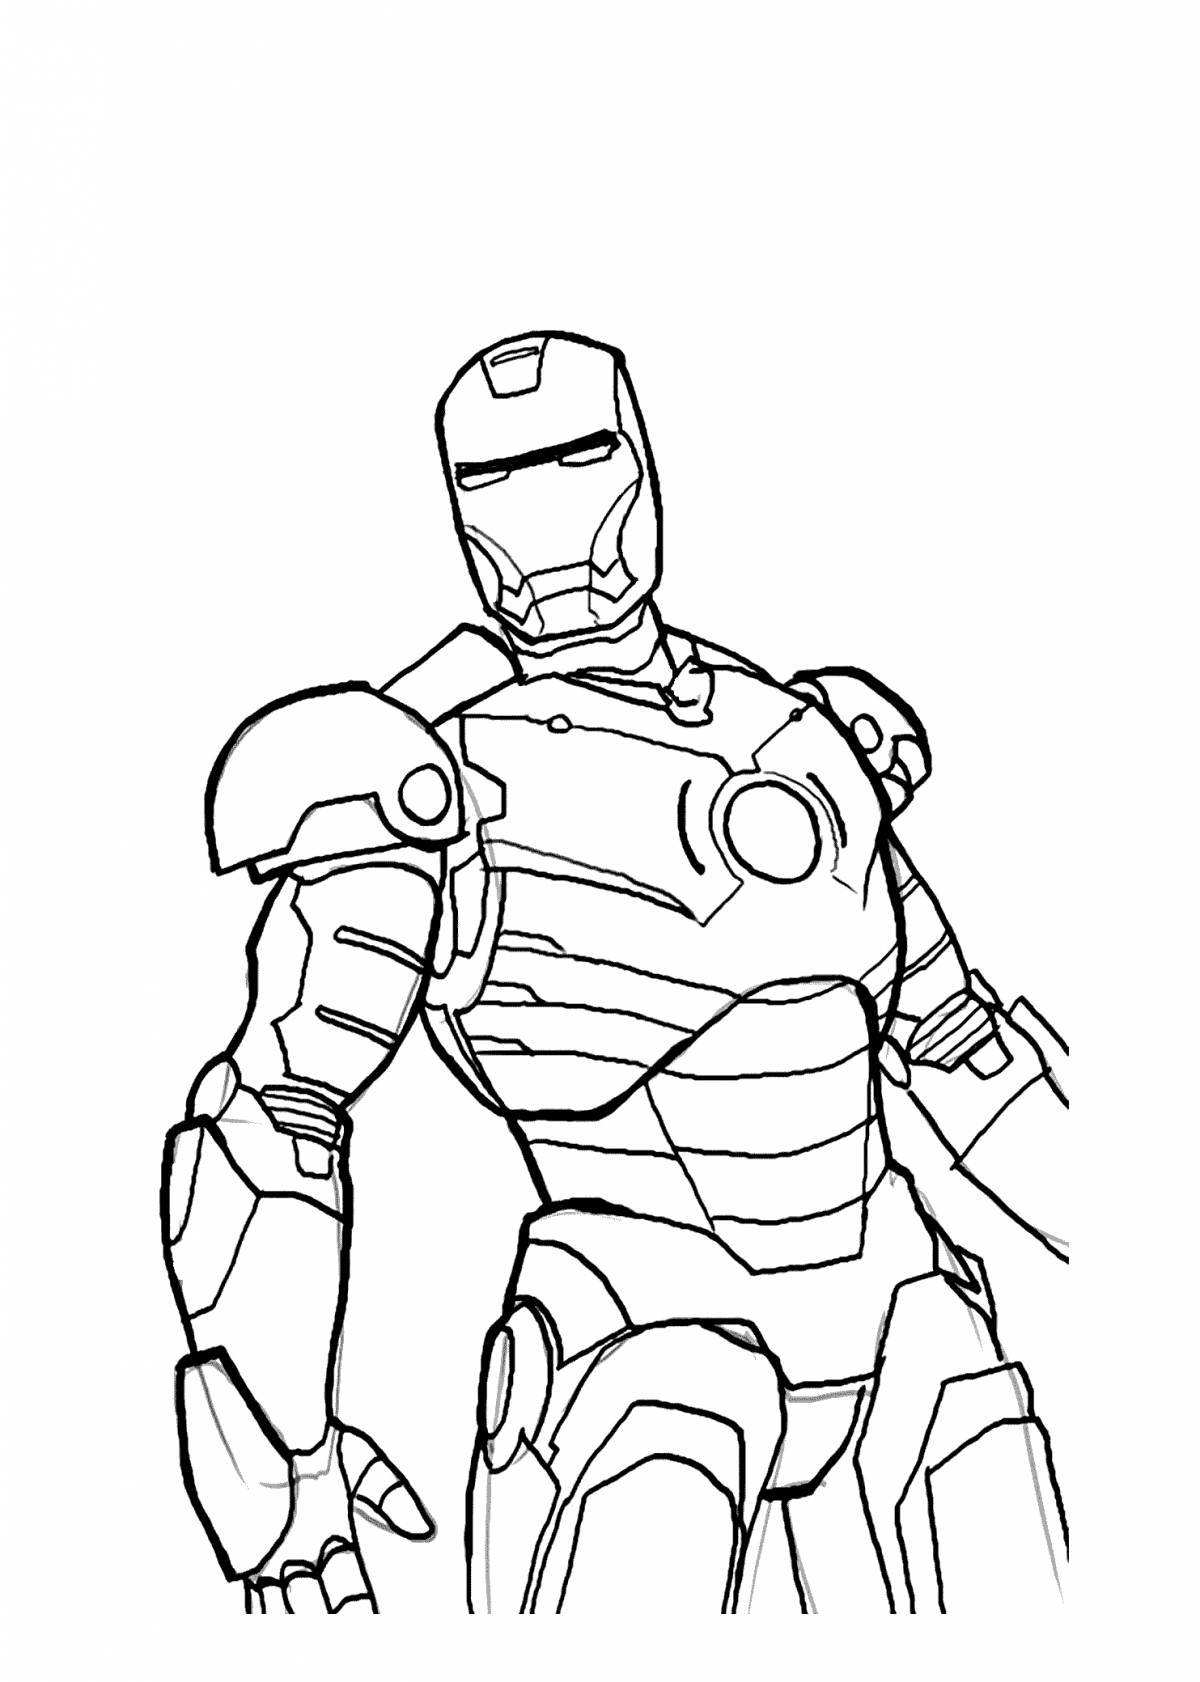 Majestic Hero Coloring Pages